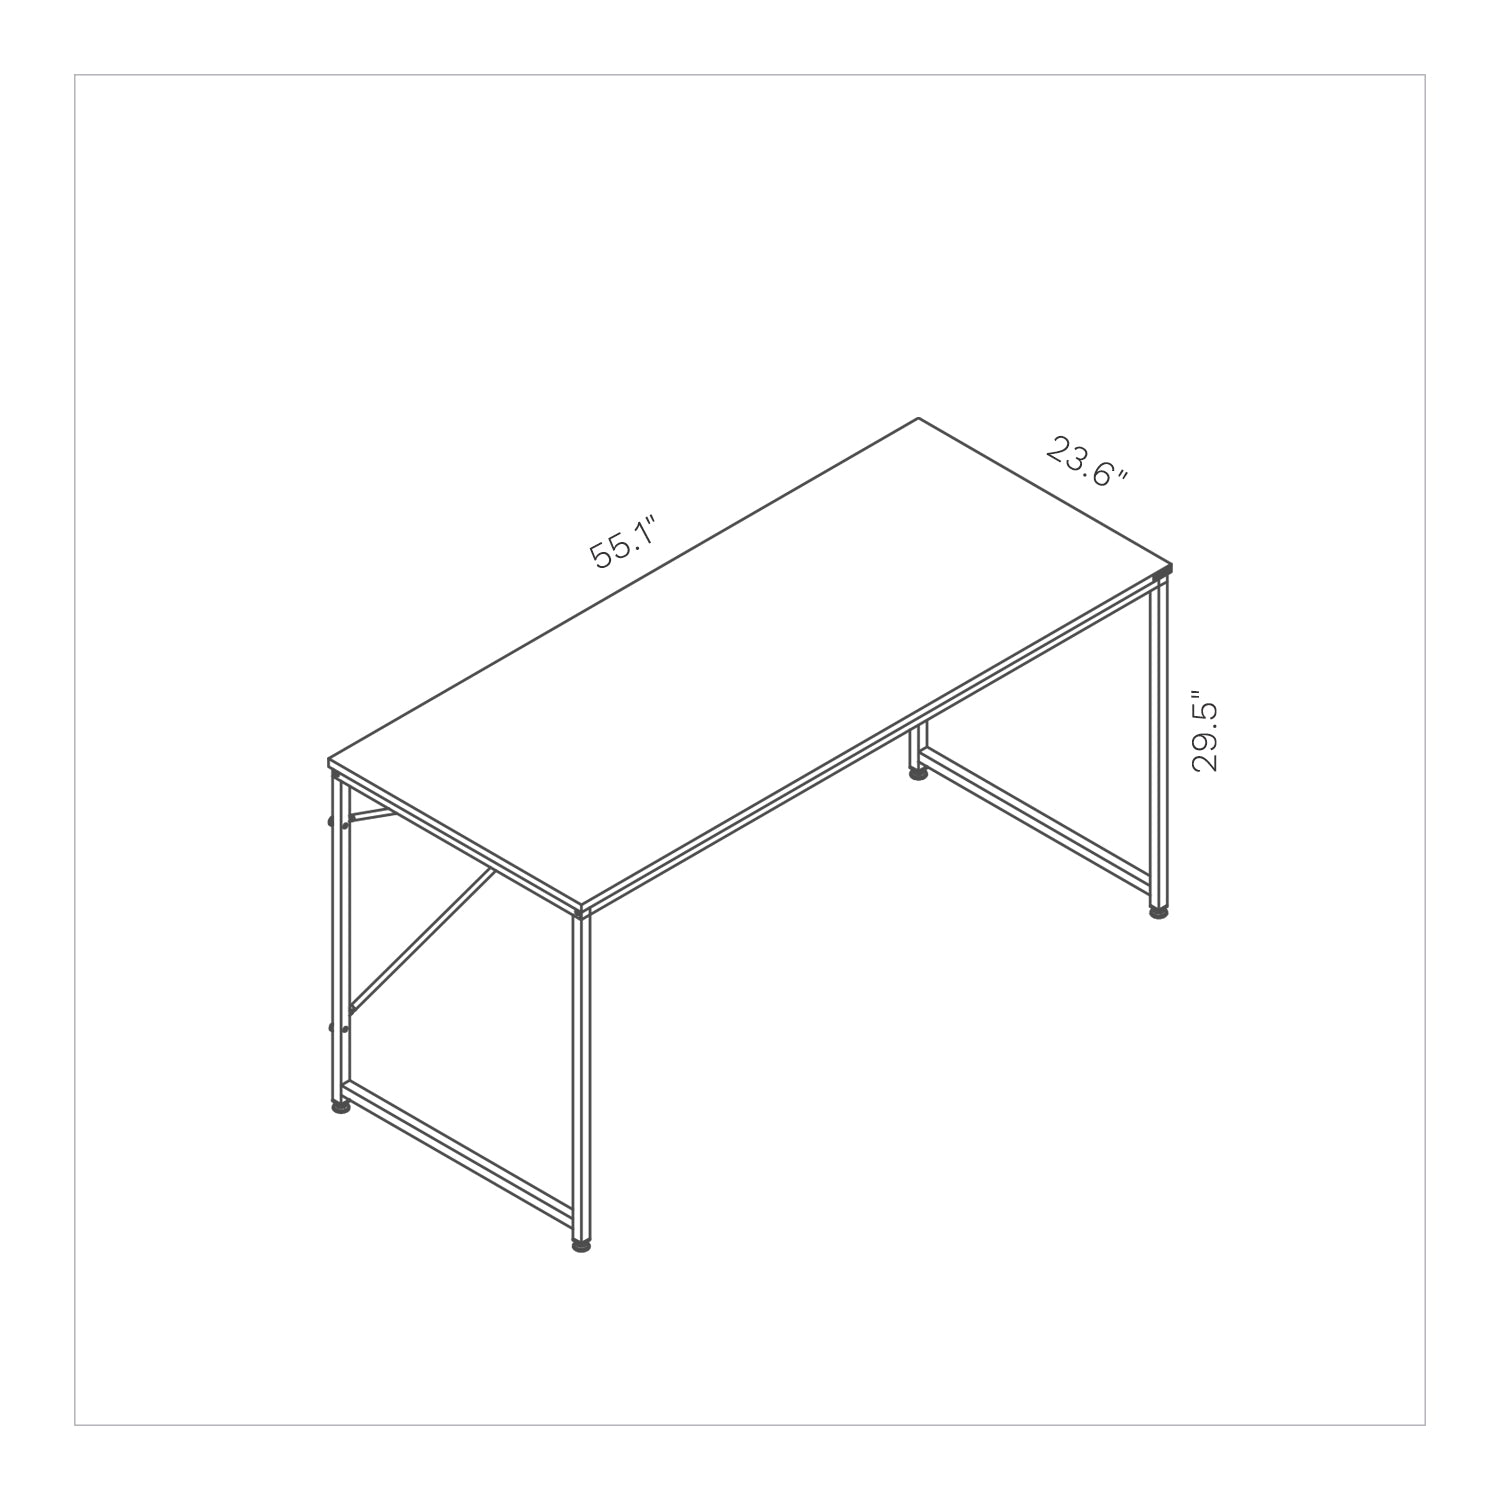 SOFSYS modern industrial design computer desk with 55.1” x 23.6” oak table top and 29.5” tall metal frame. simple and spacious